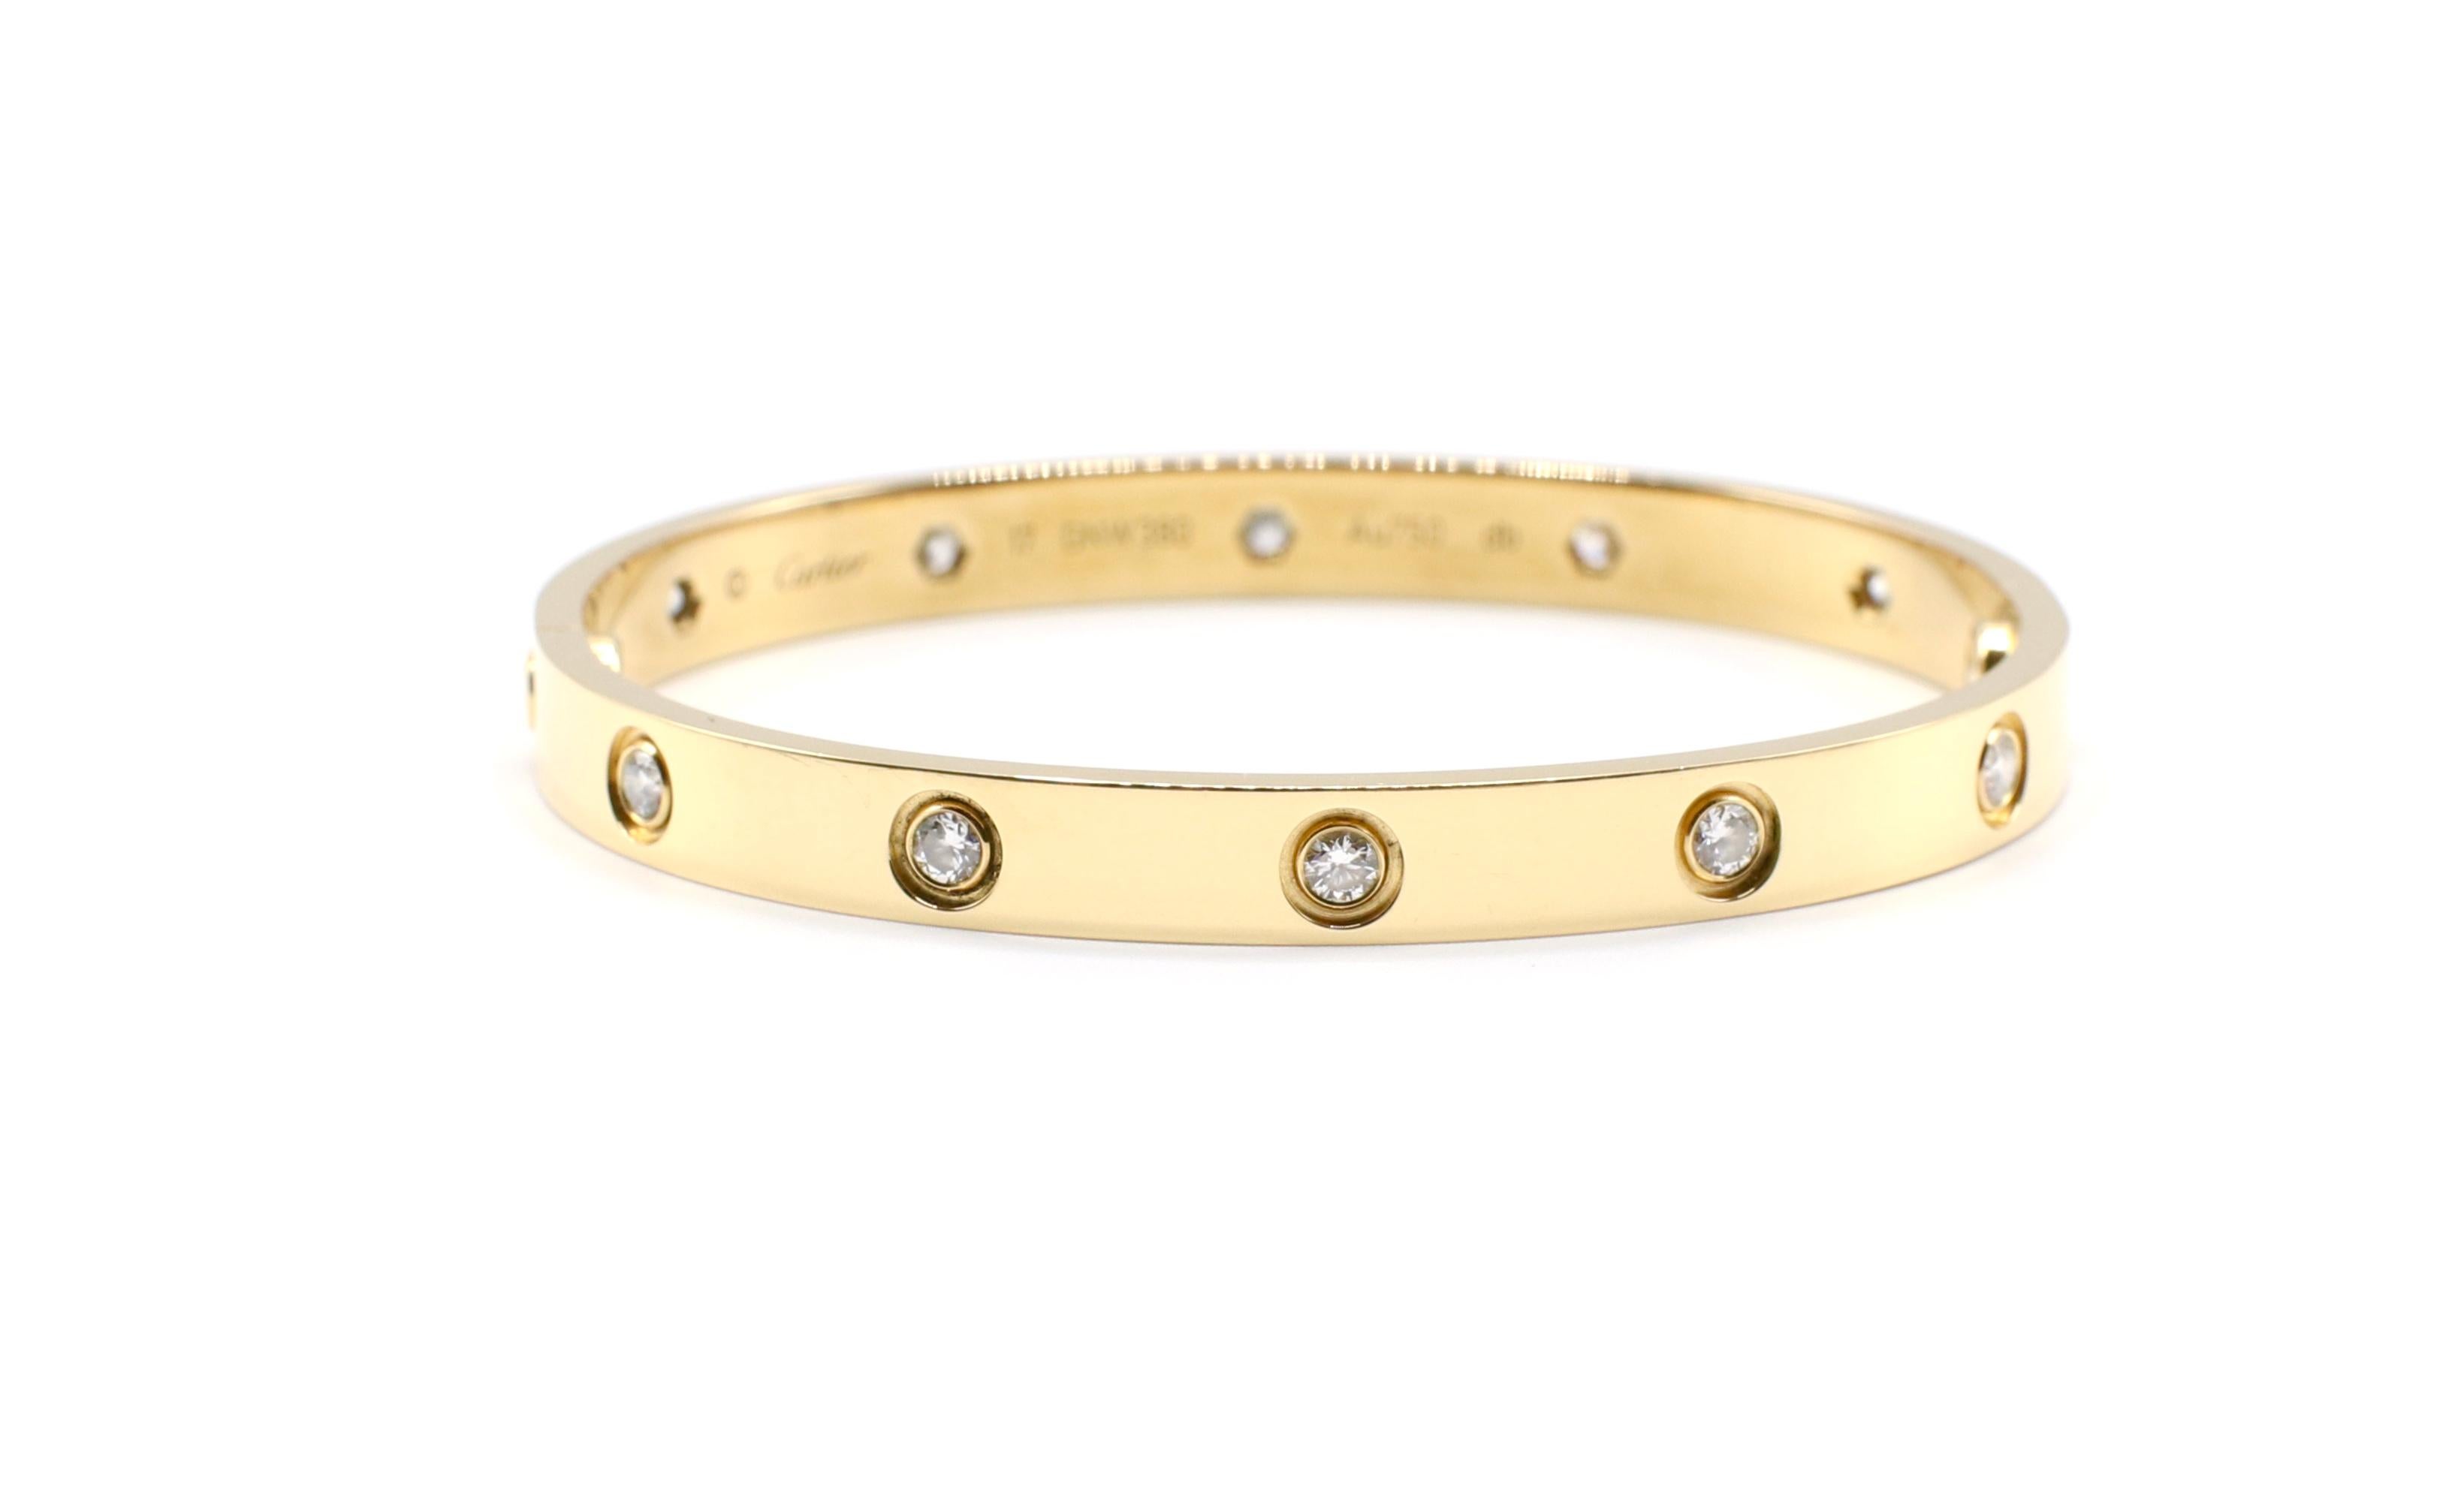 Contemporary Cartier 18 Karat Yellow Gold 10 Diamond Love Bracelet Box and Papers Size 17